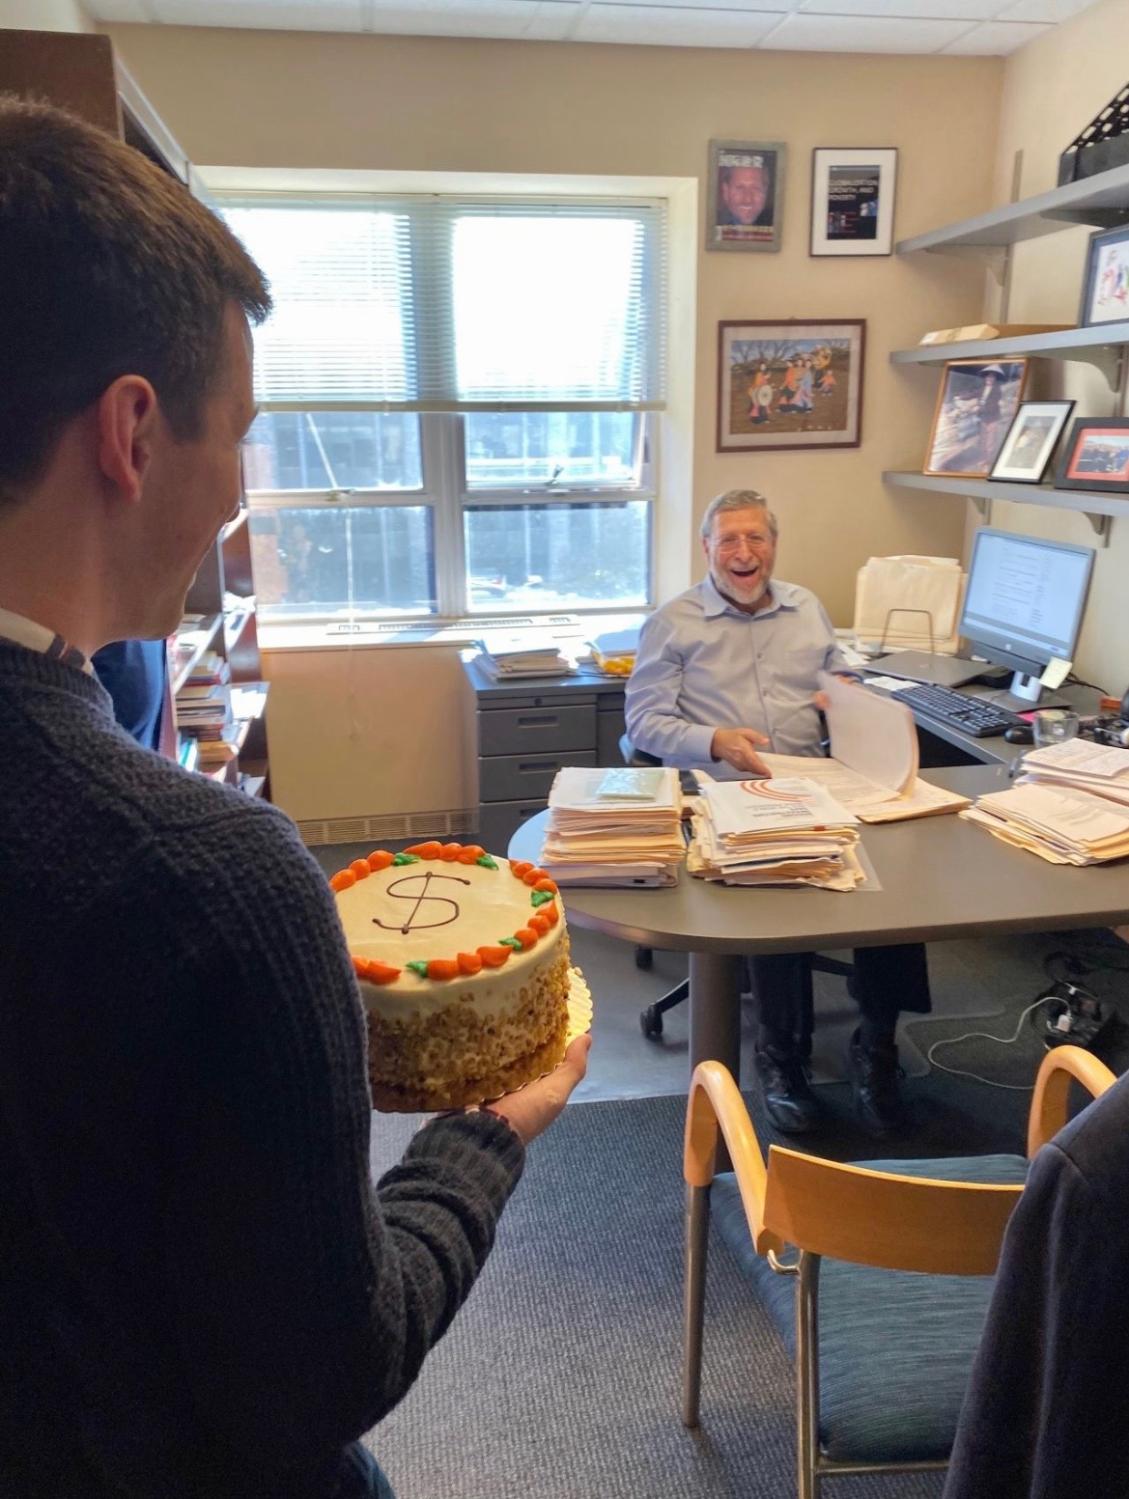 Surprising David Dollar with a surprise "birthday" cake on the one-year anniversary of the Dollar & Sense podcast.